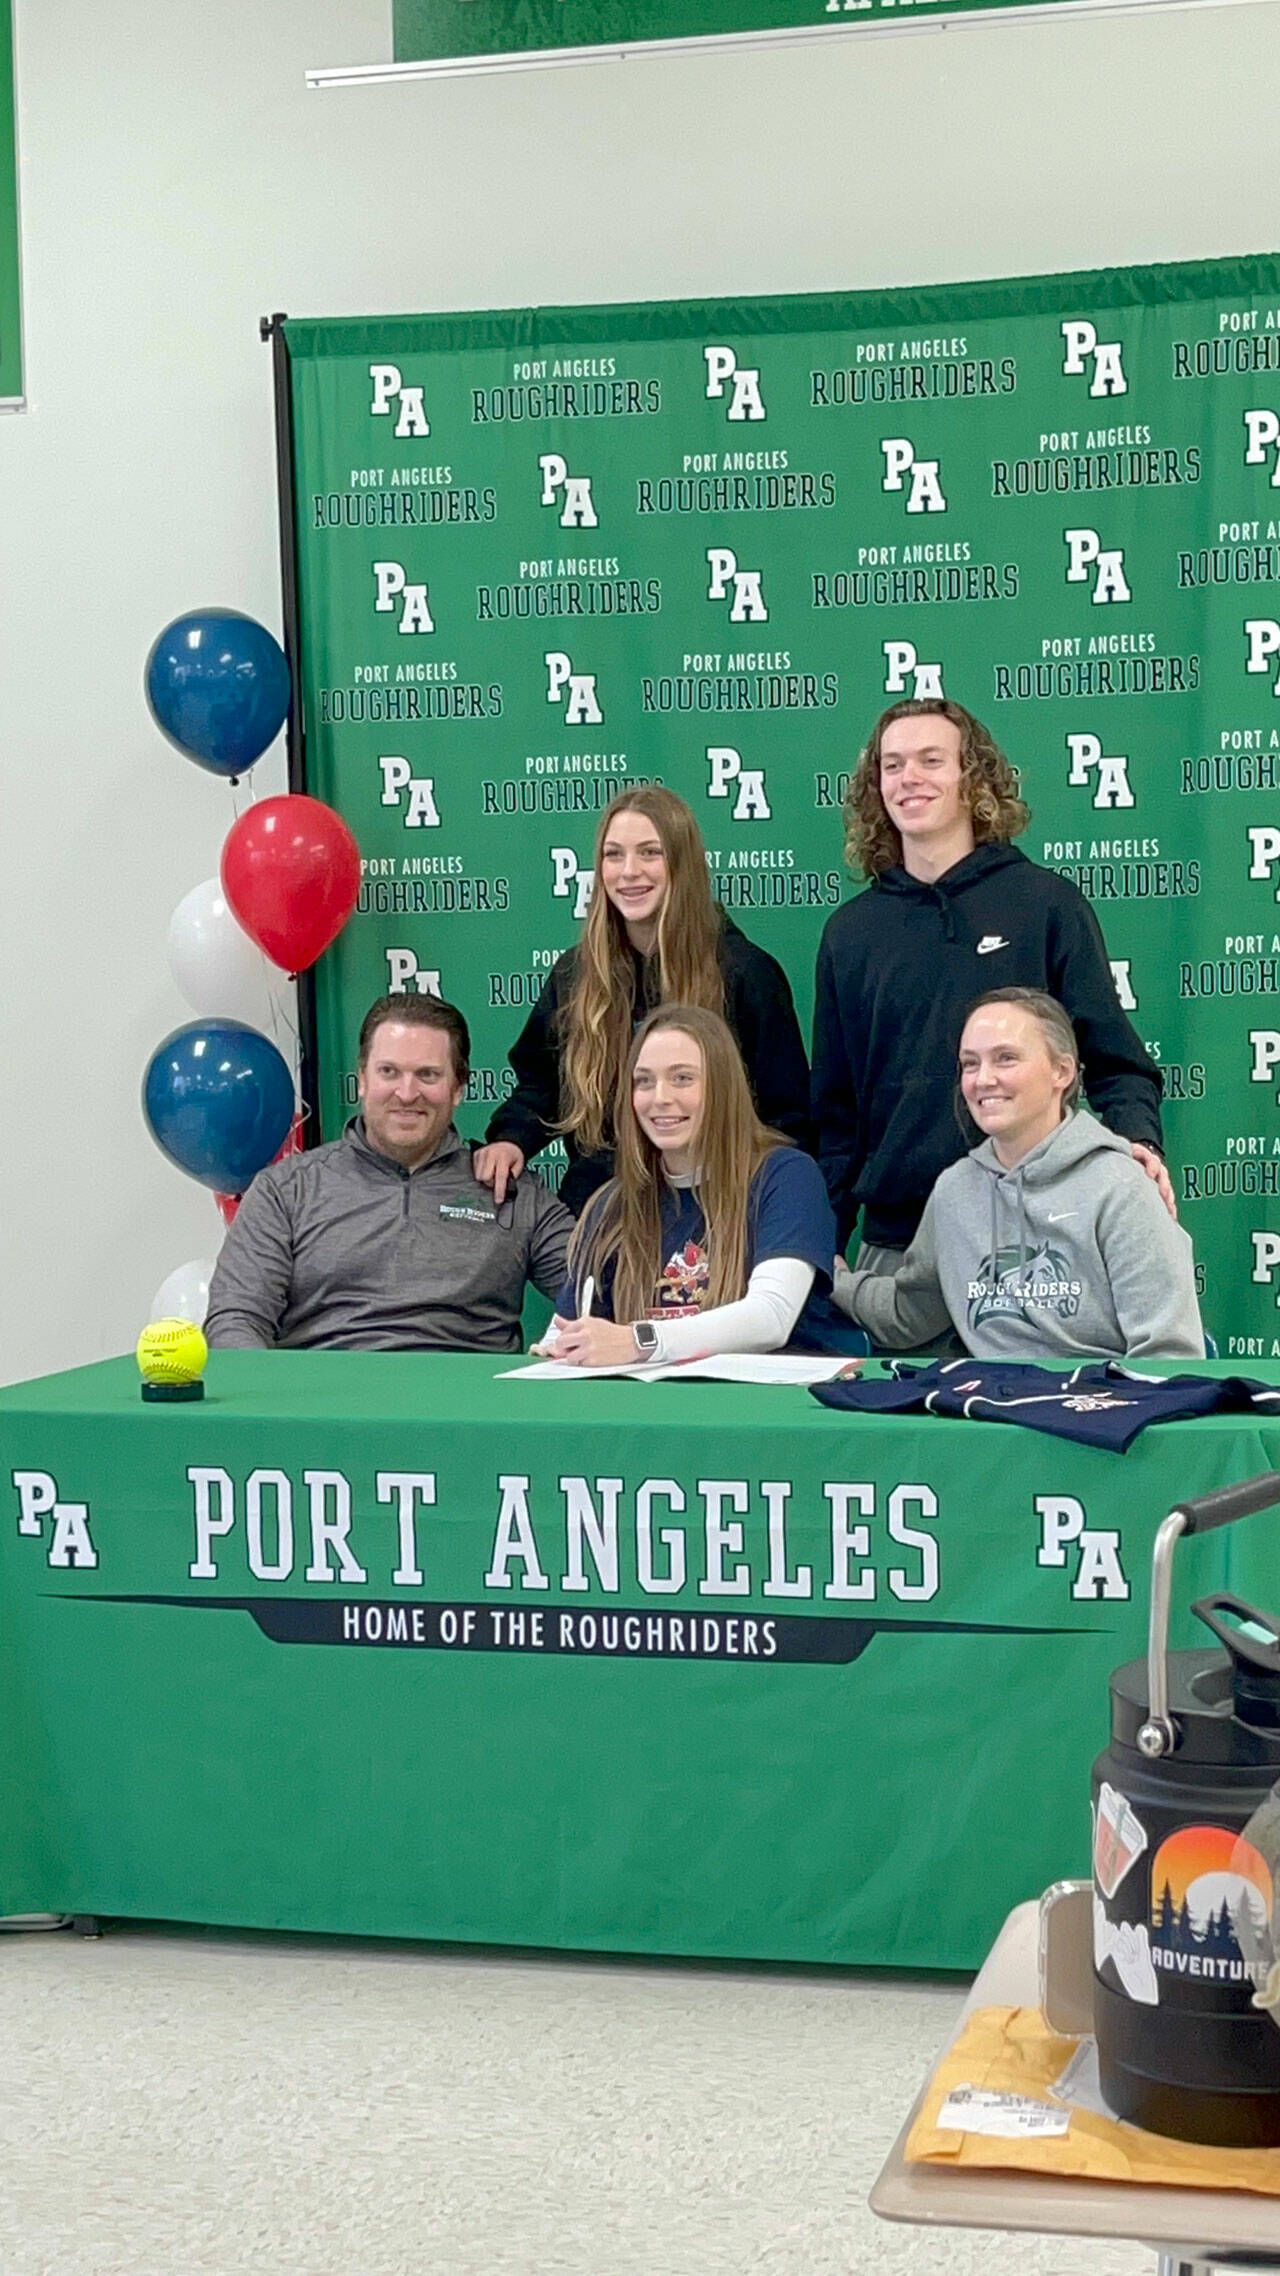 Port Angeles senior Teagan Clark, seated at center, signs a letter of intent to play softball at Skagit Valley College with her family in attendance including dad Dustin Clark, mom Tasha Clark, sister Teanna and brother Dru.